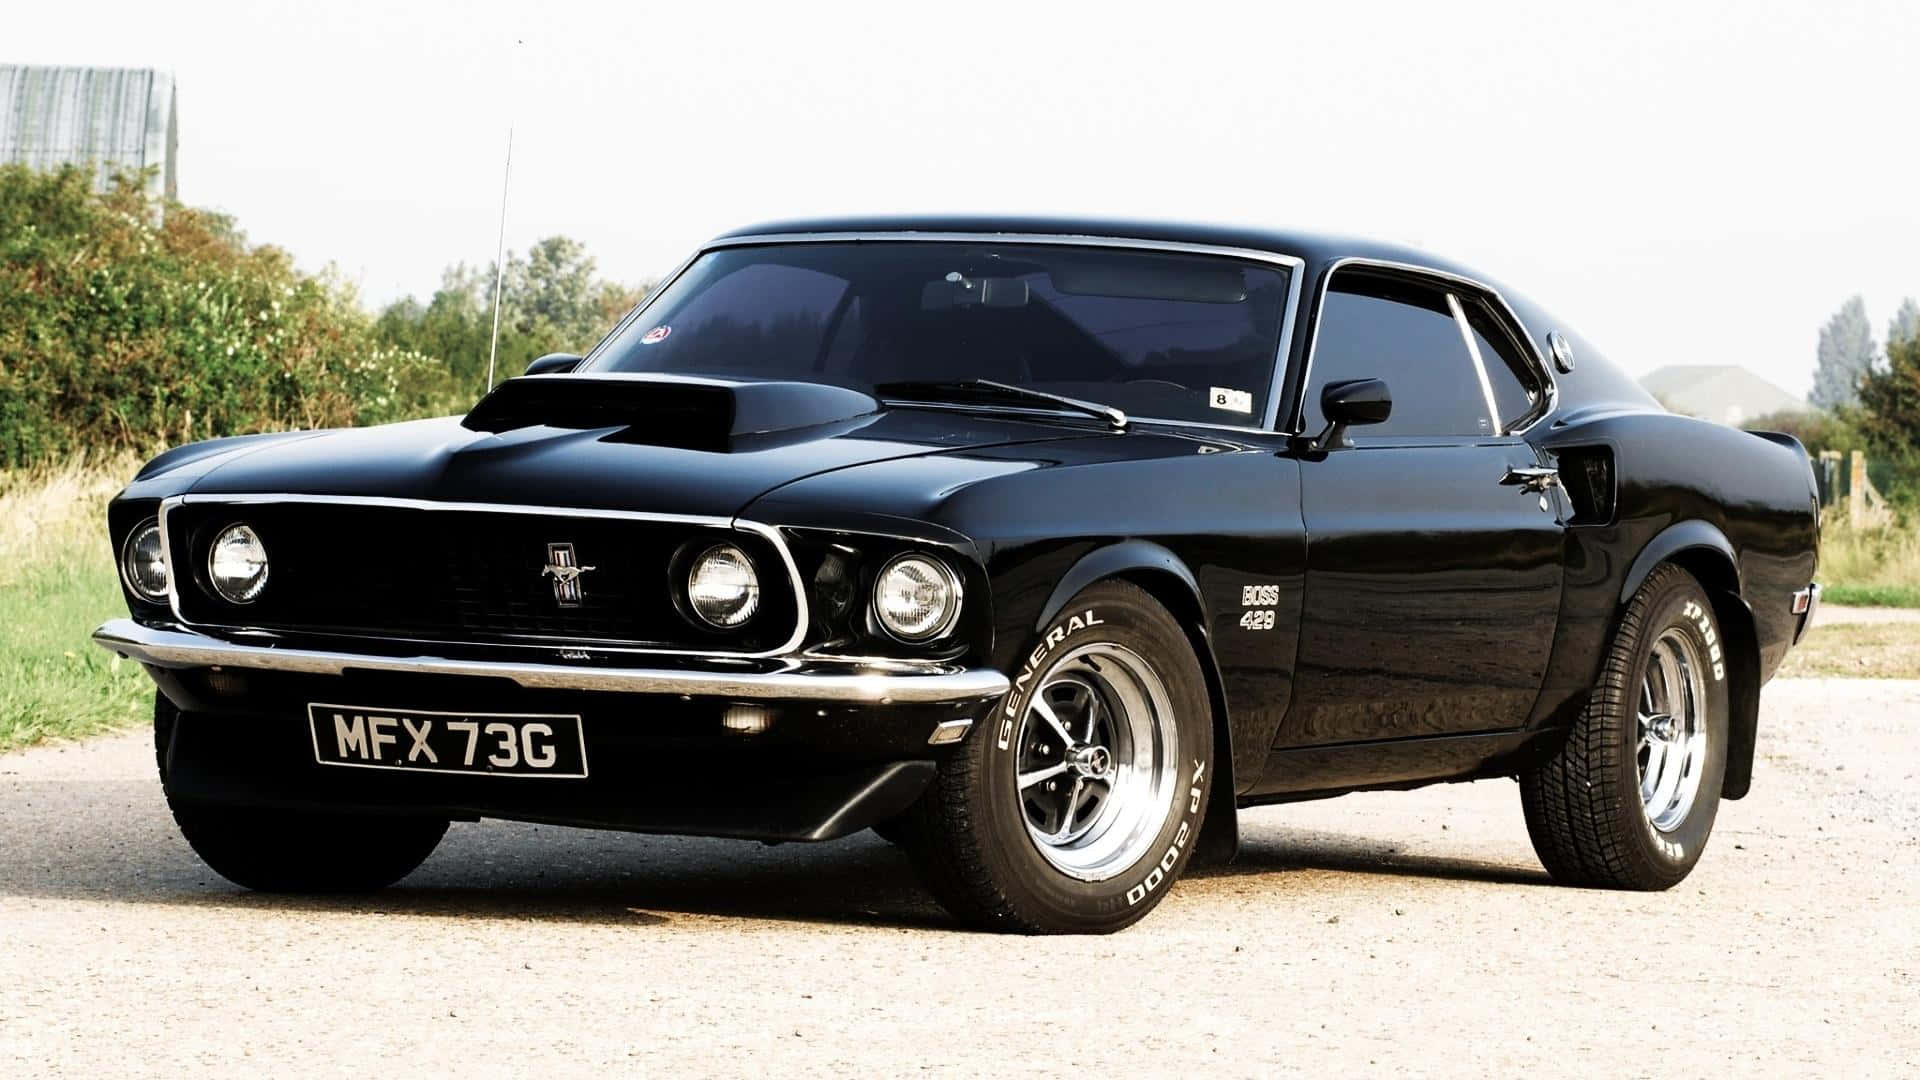 A Black Mustang Parked On A Dirt Road Wallpaper